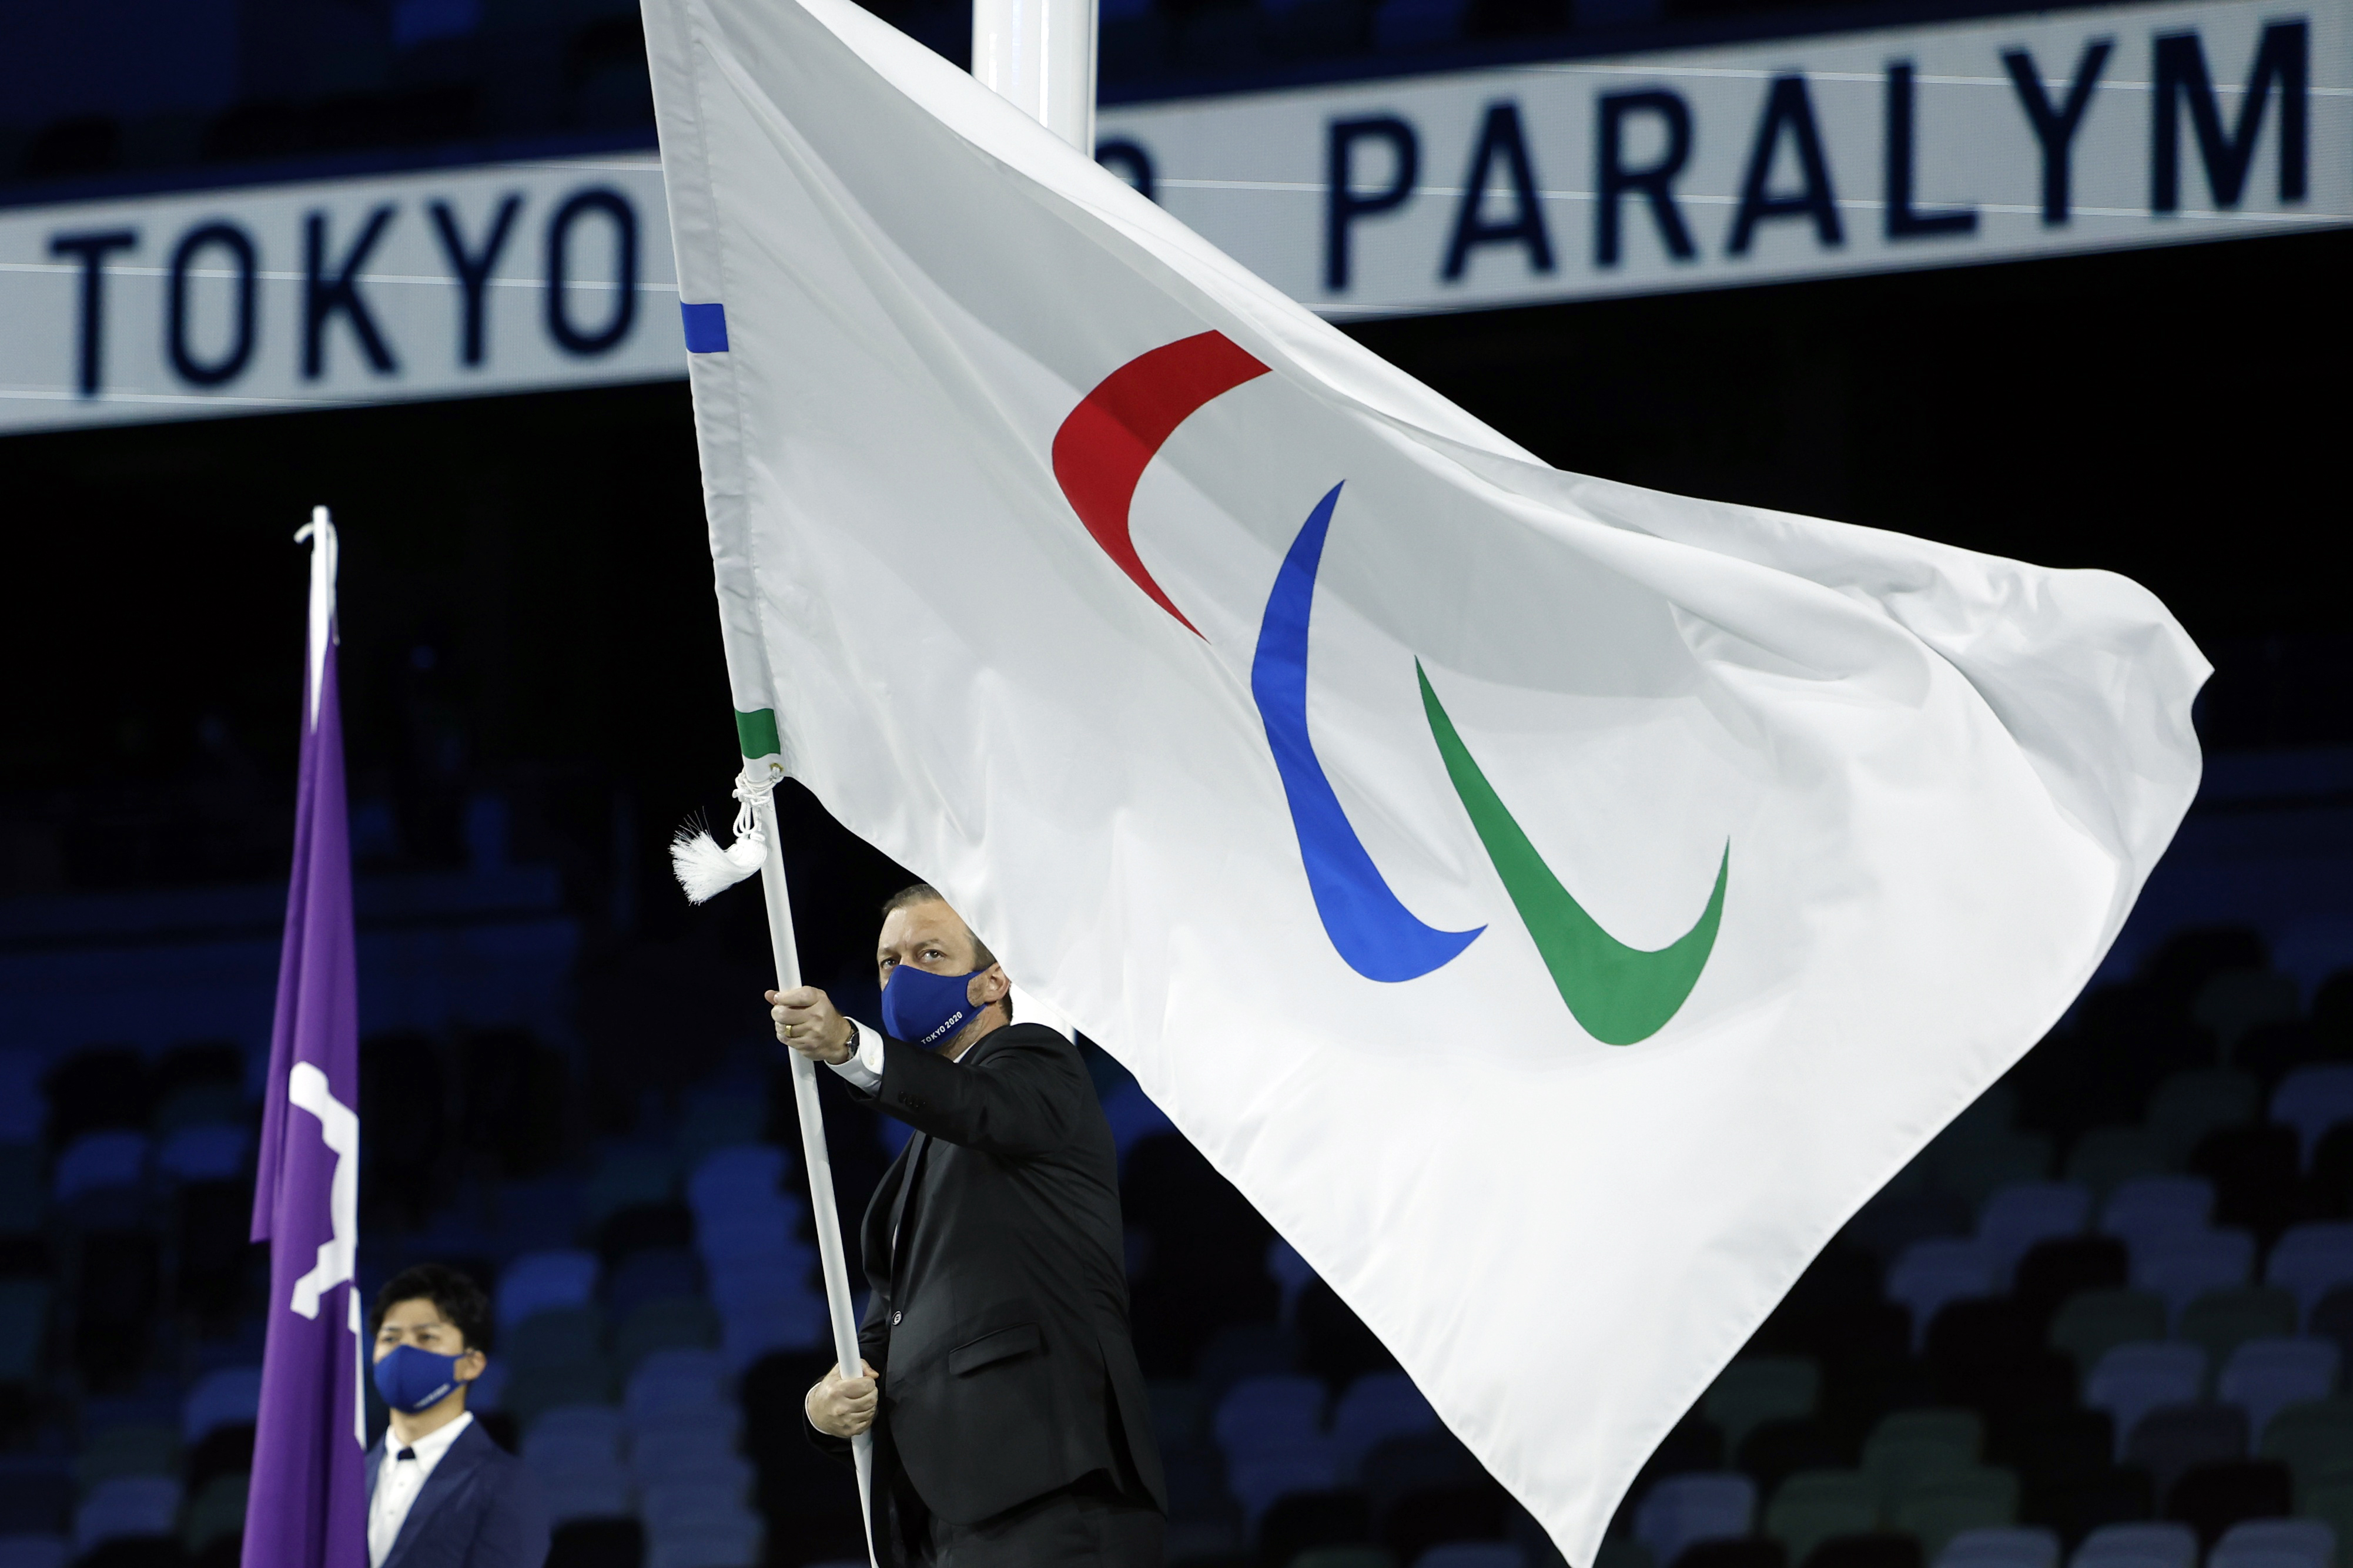 Tokyo 2020 Paralympic Games - The Tokyo 2020 Paralympic Games Closing Ceremony - Olympic Stadium, Tokyo, Japan - September 5, 2021. The International Paralympic Committee President Andrew Parsons waves the Paralympic flag during the closing ceremony REUTERS/Issei Kato